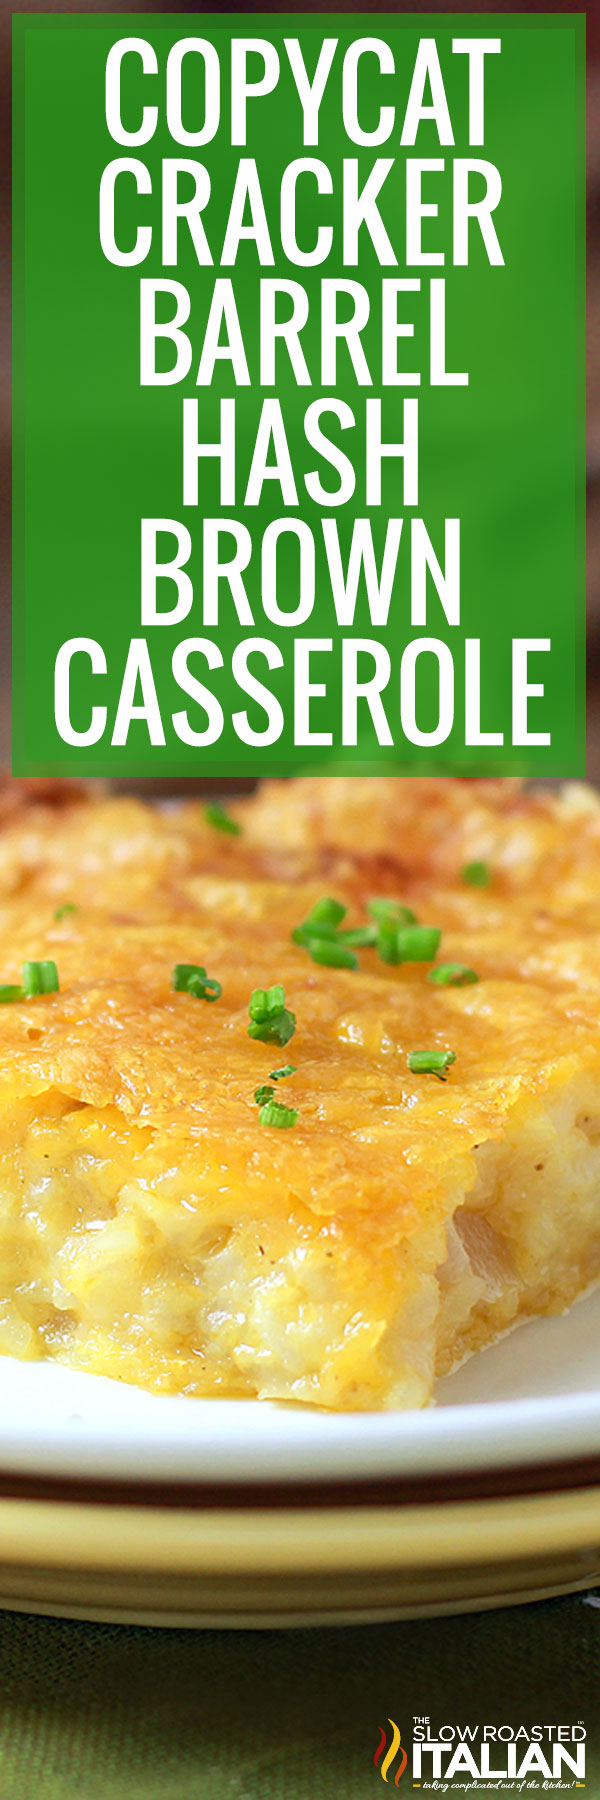 titled image (and shown): cracker barrel hashbrown casserole copycat recipe